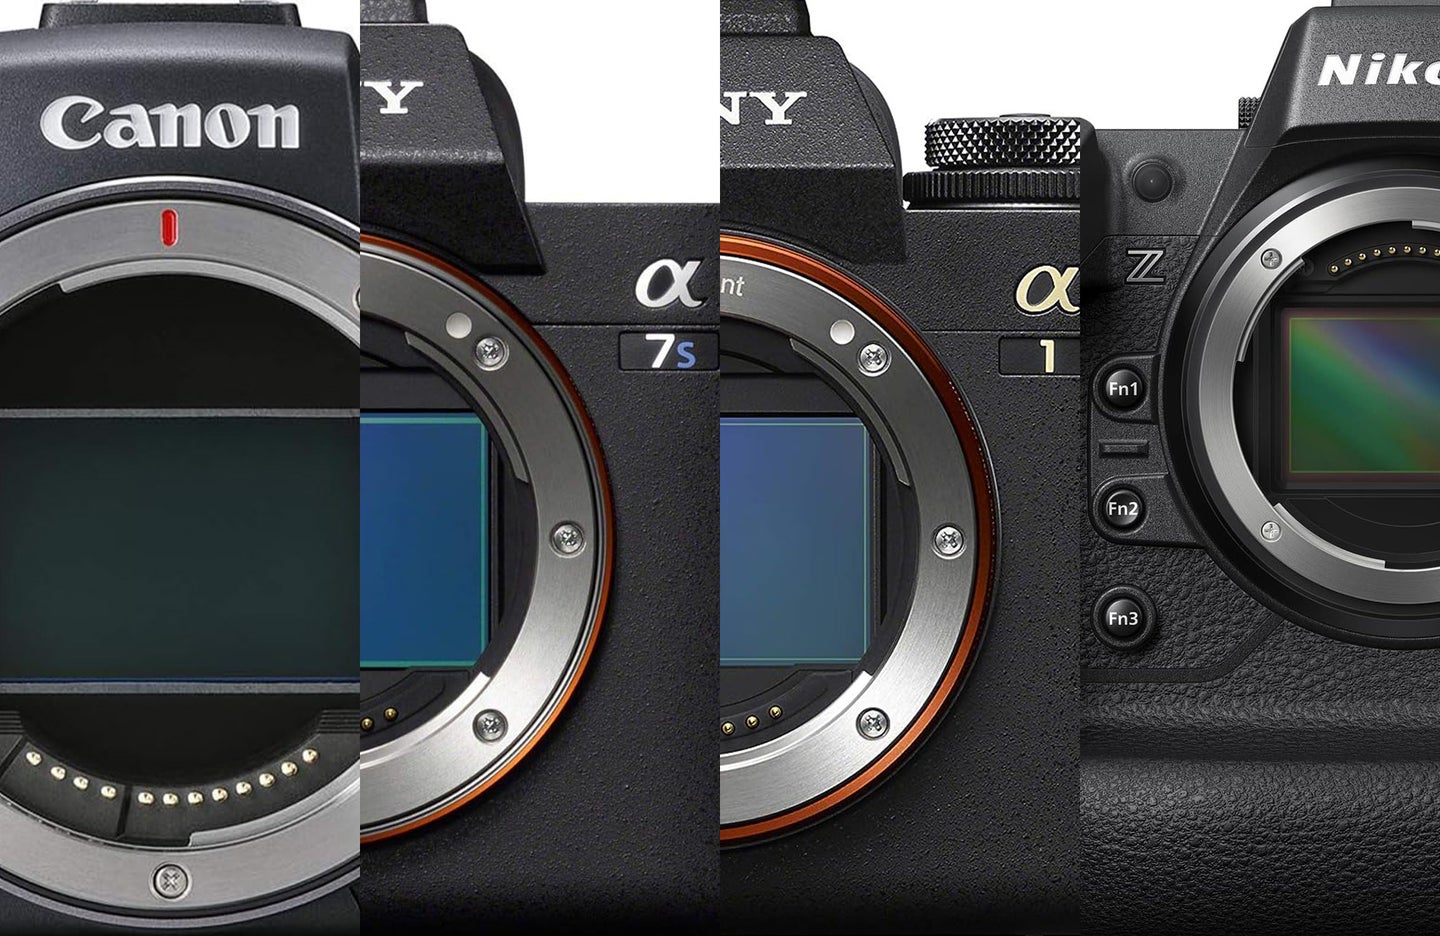 Four of the best full-frame cameras are sliced together against a white background.